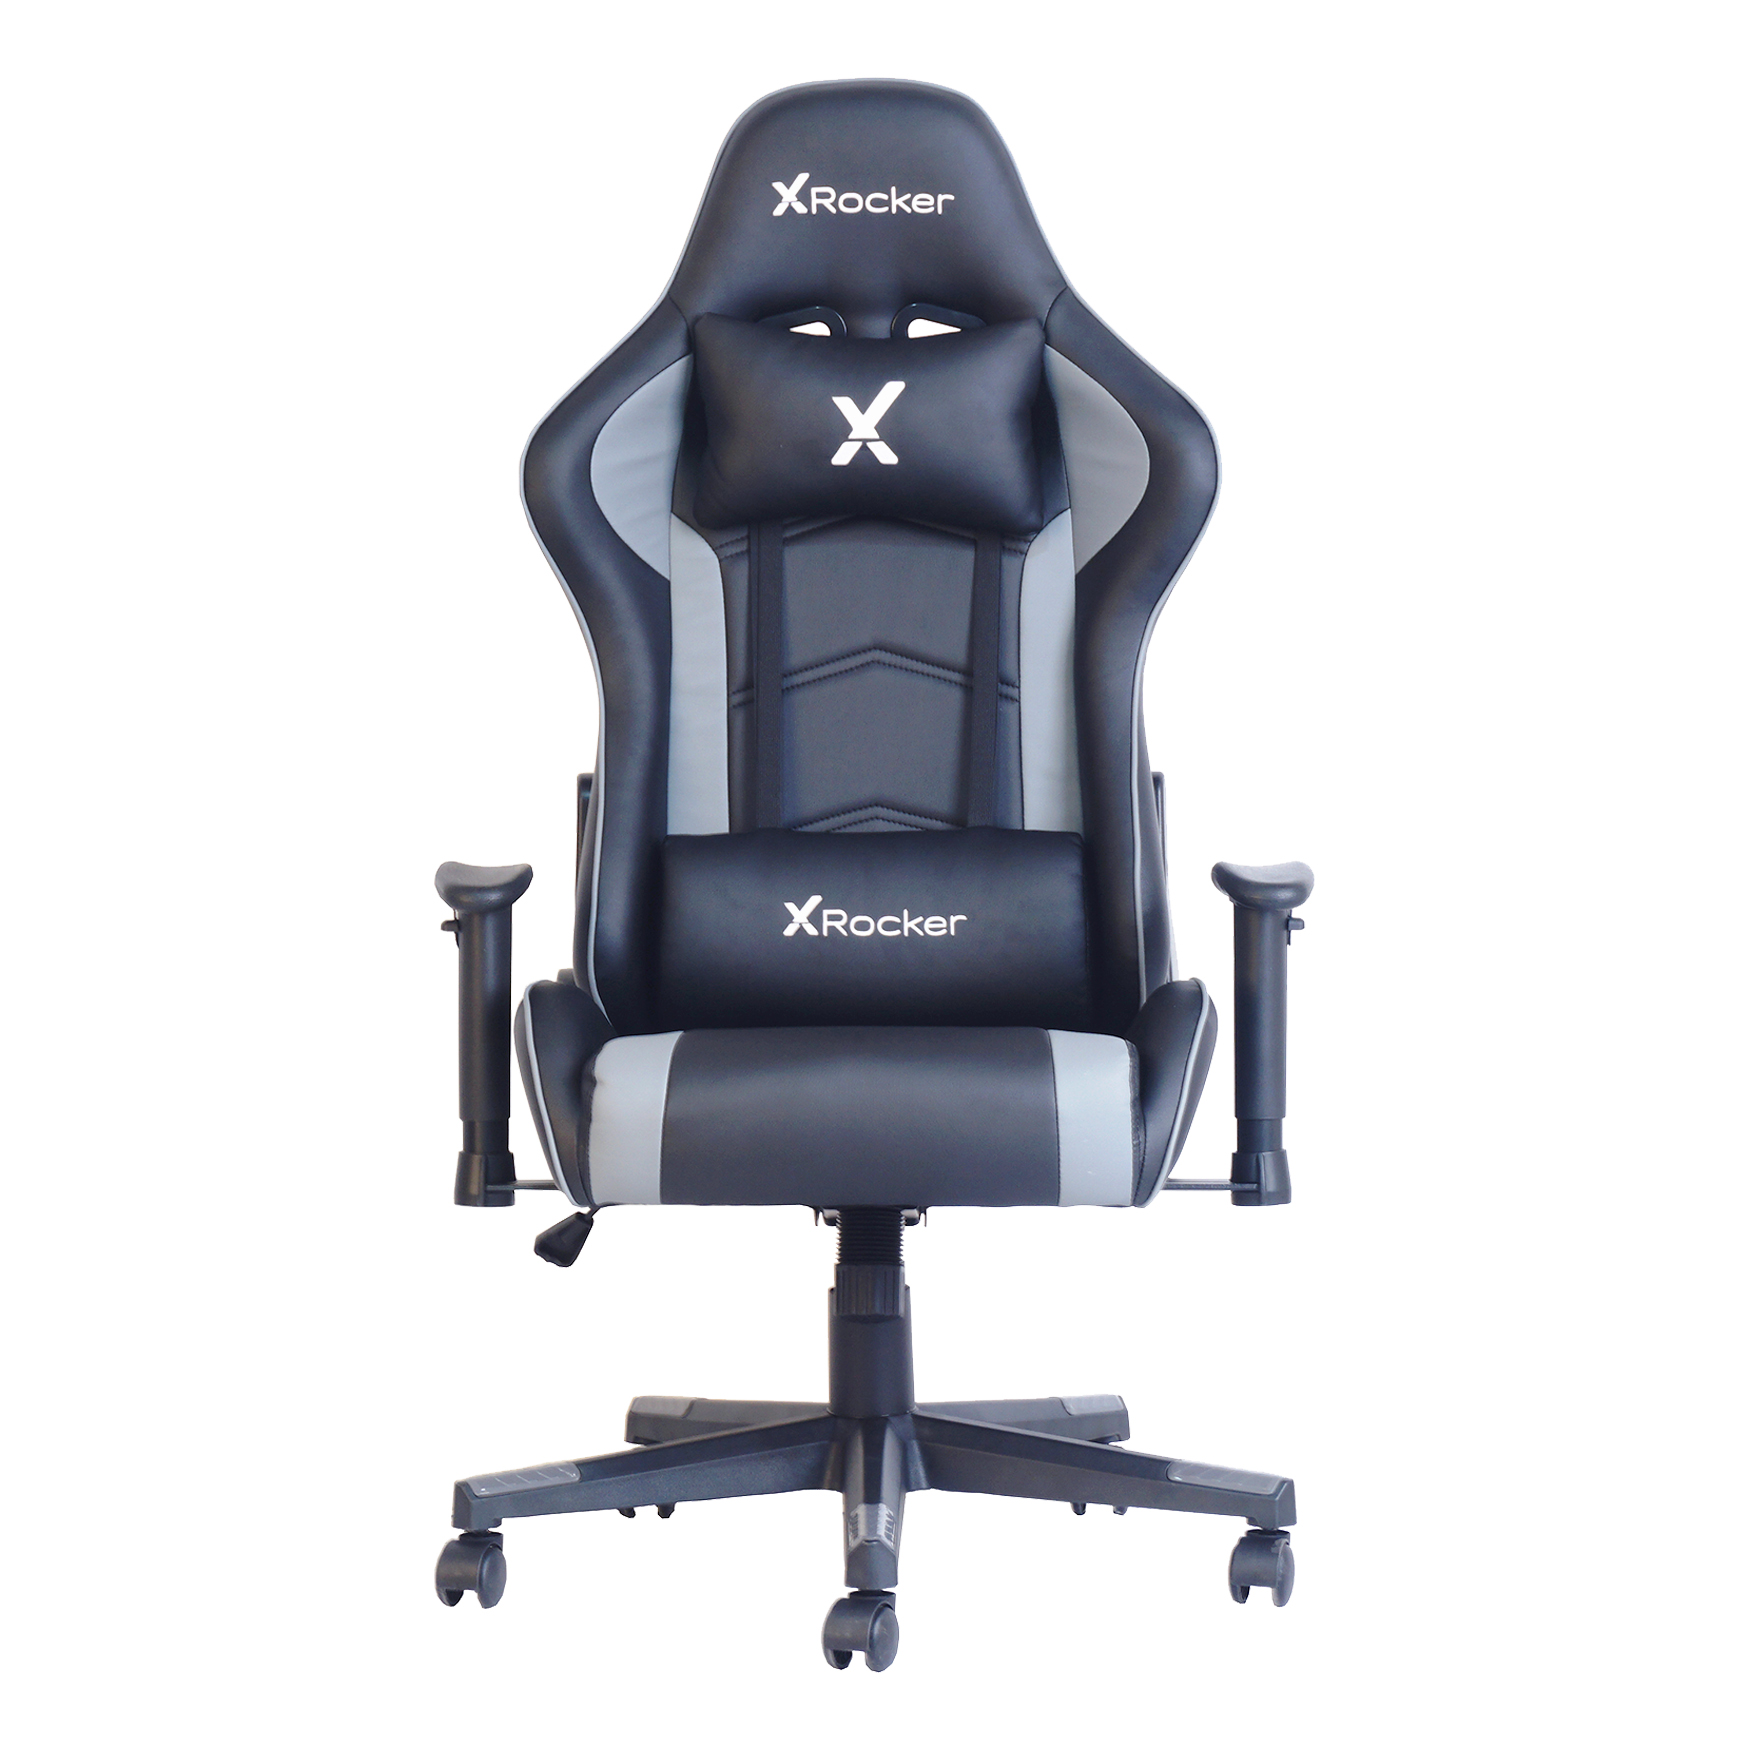 X Rocker Vortex Leather PC Gaming Chair, Black and Gray, 24.8" x 27.17" x 48.22-51.97" - image 3 of 10